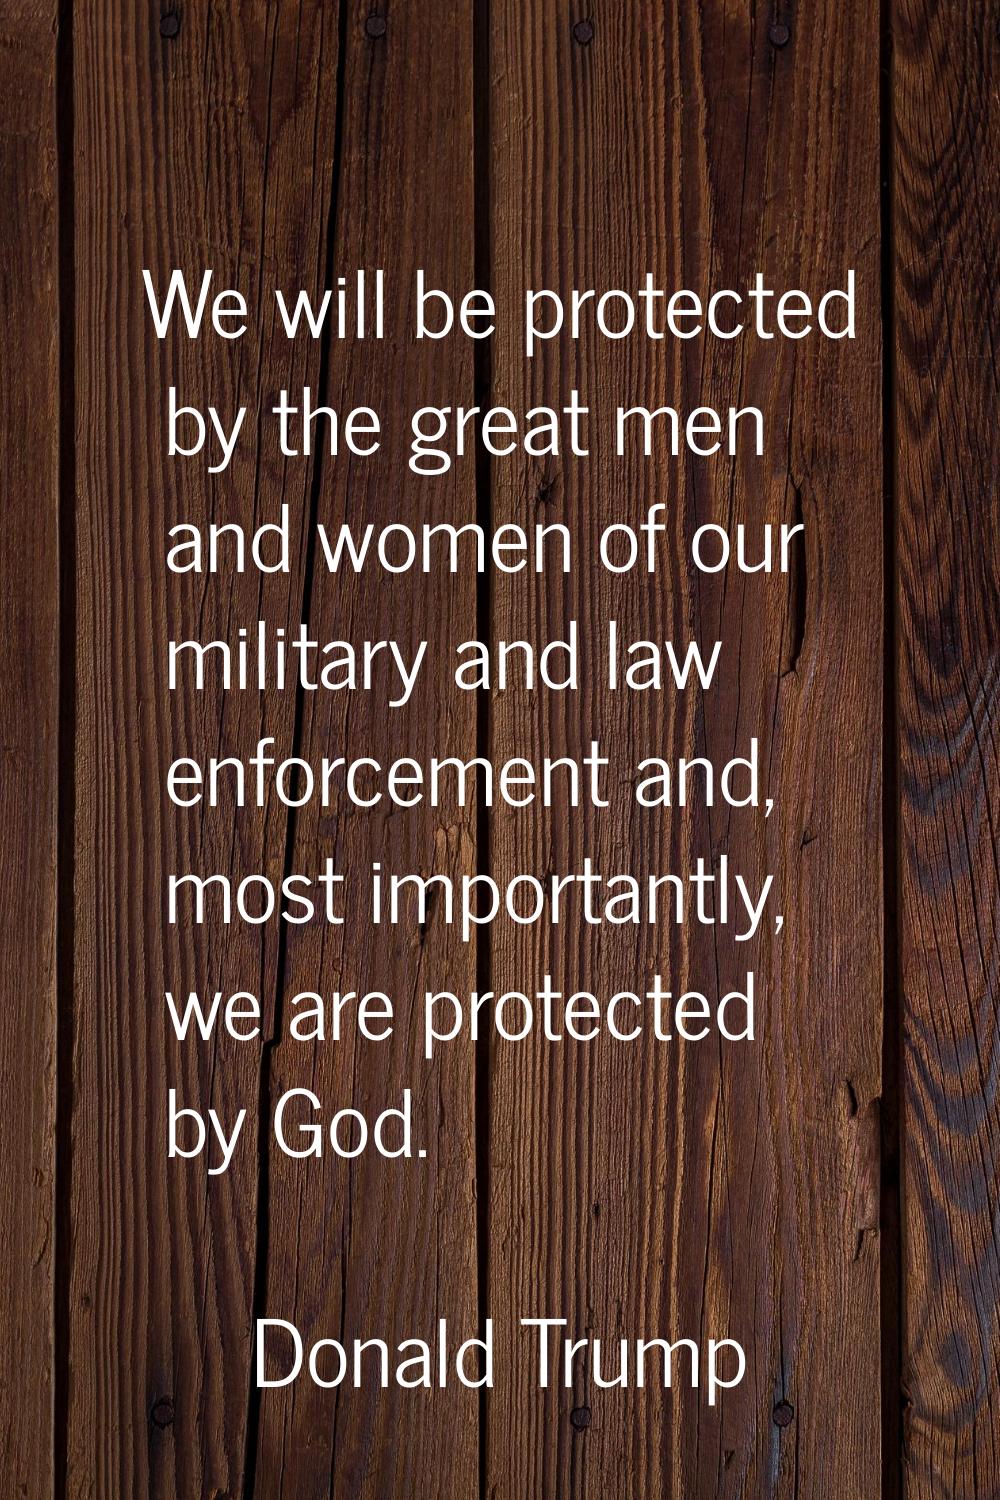 We will be protected by the great men and women of our military and law enforcement and, most impor